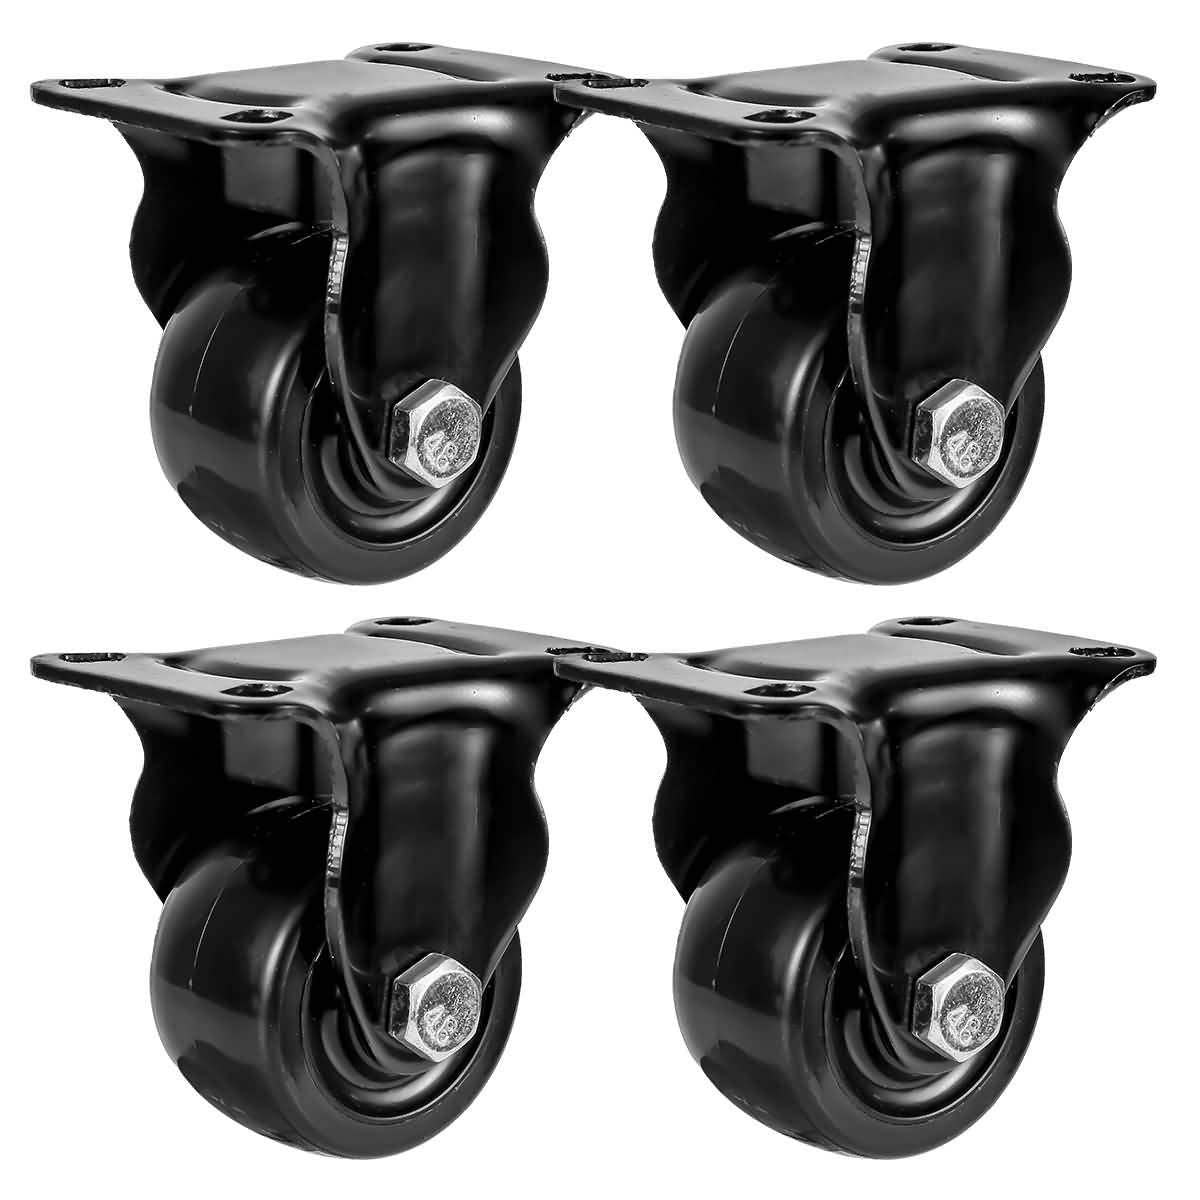 FactorDuty 2 inch Heavy Duty Polyurethane Caster Wheels Rigid Fixed Non Swivel Industrial Grade Solid Low Profile Smooth and Silent 1000LB Capacity Pack of 4